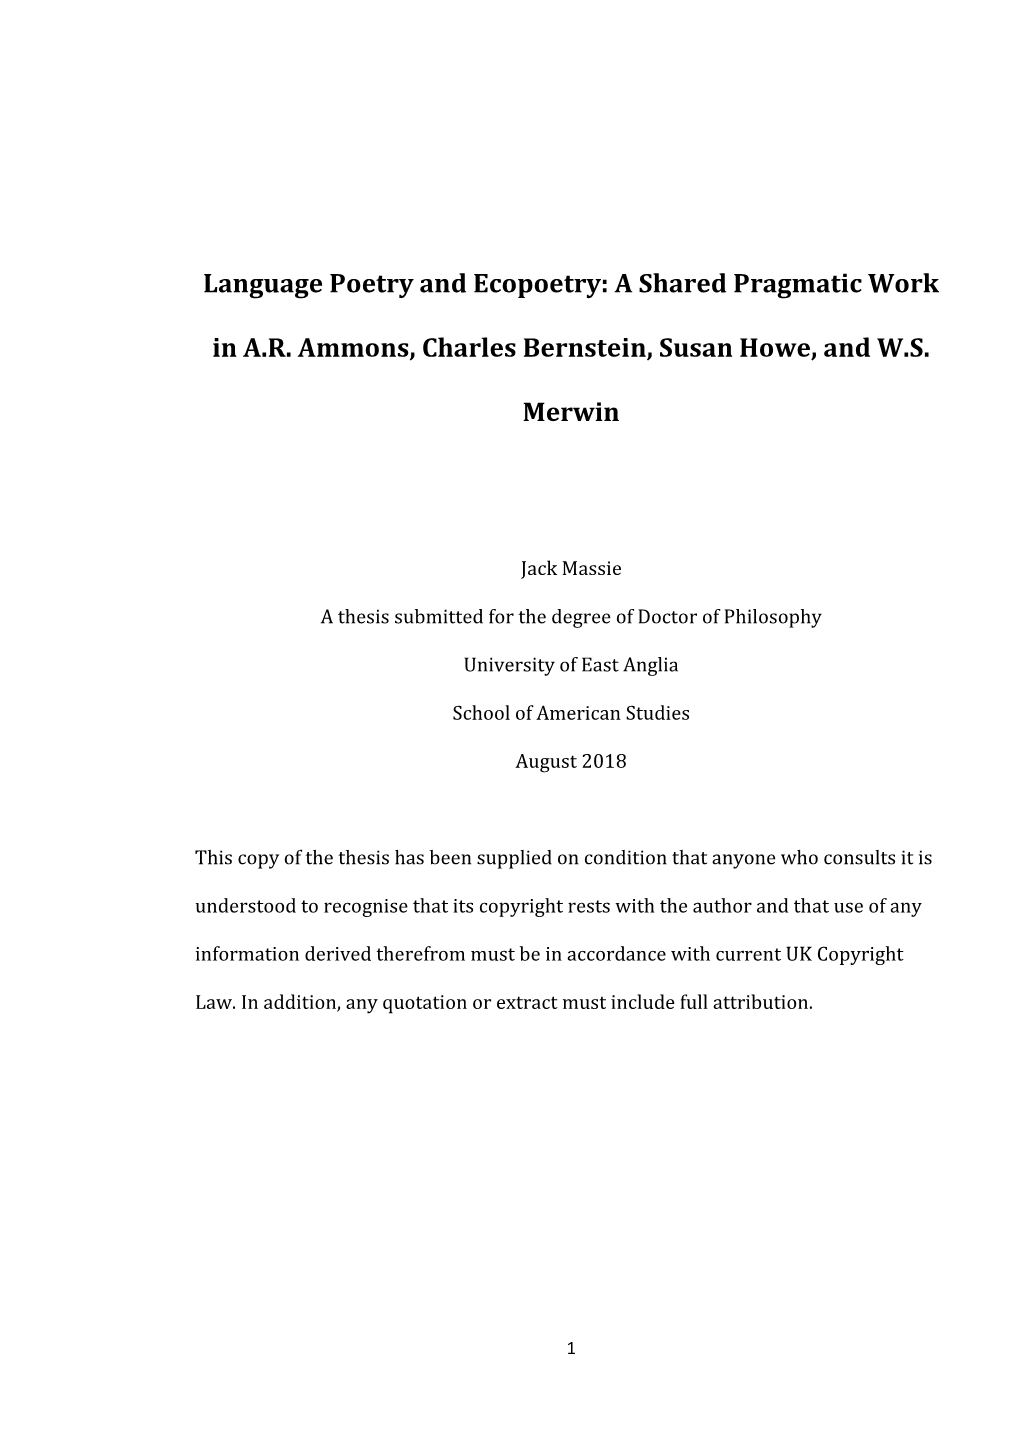 Language Poetry and Ecopoetry: a Shared Pragmatic Work